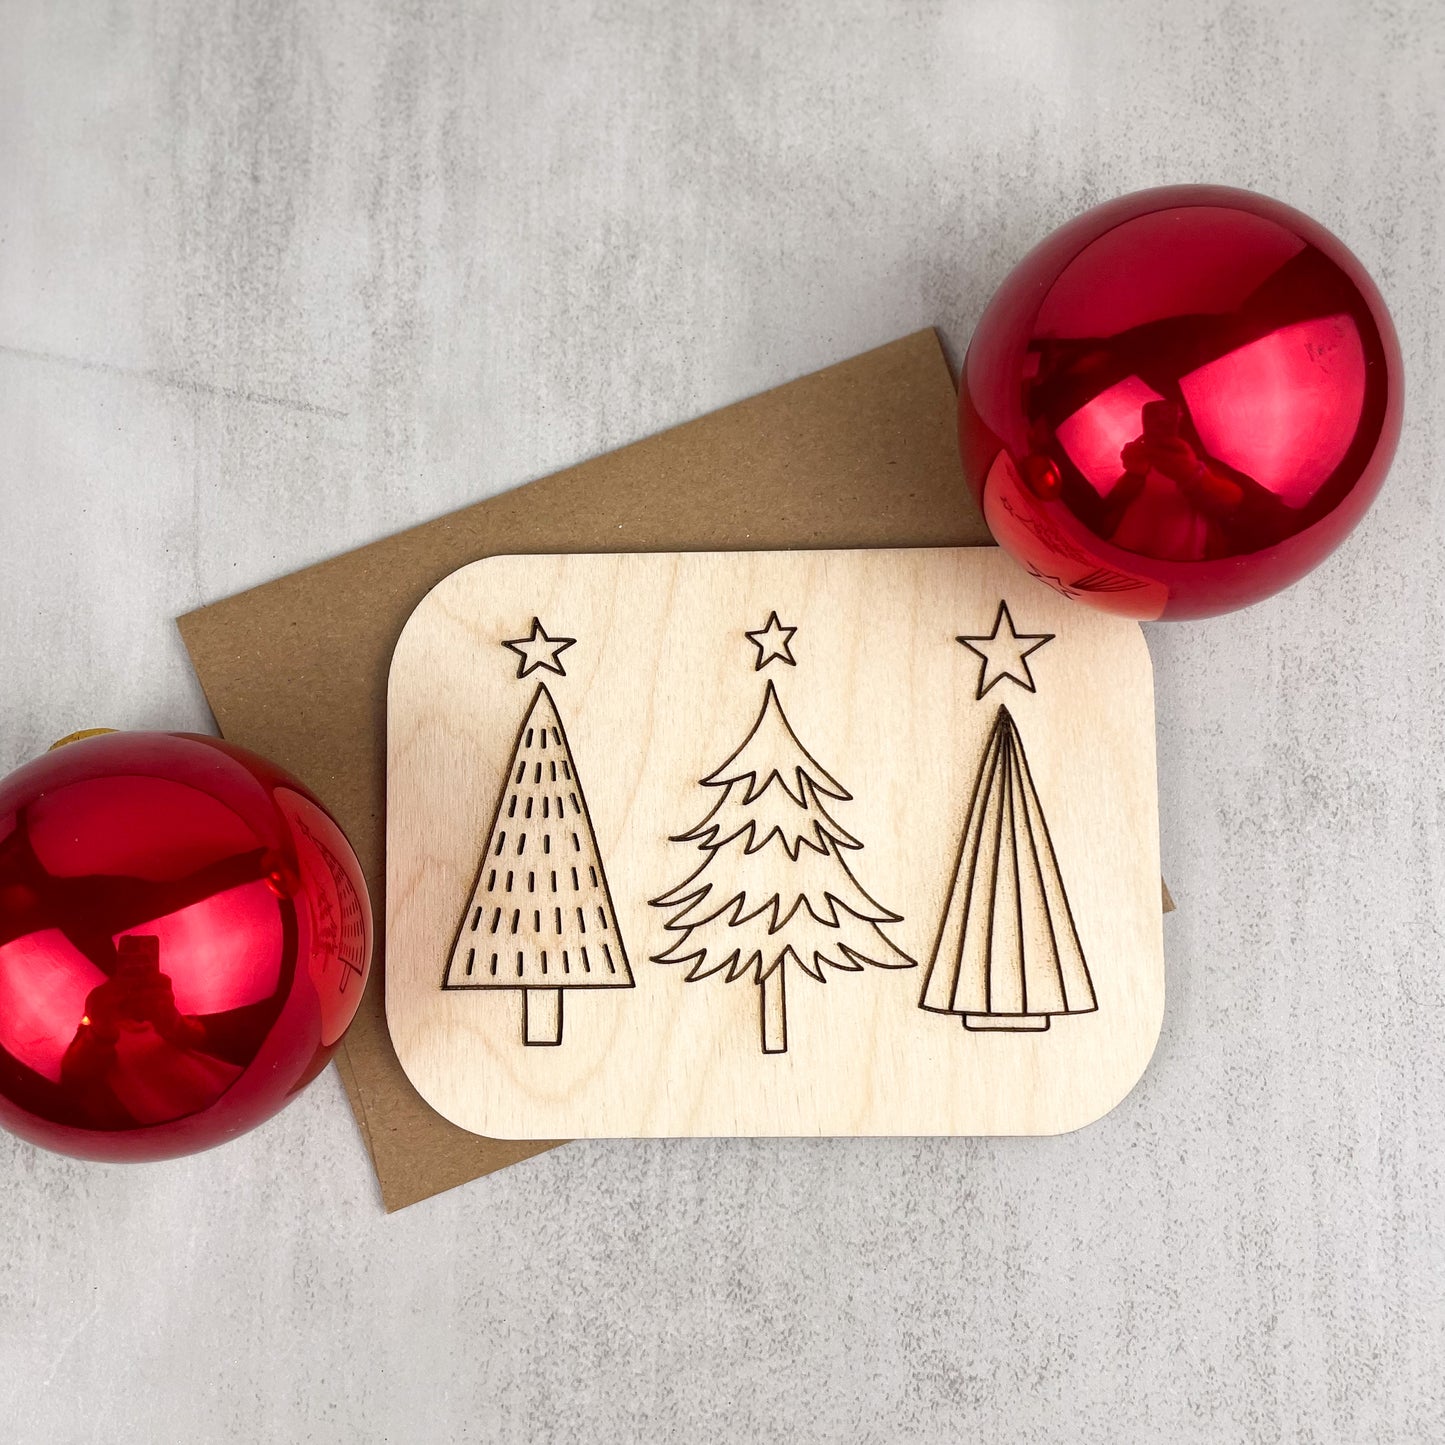 Wooden Greeting Card: Christmas Trees Card